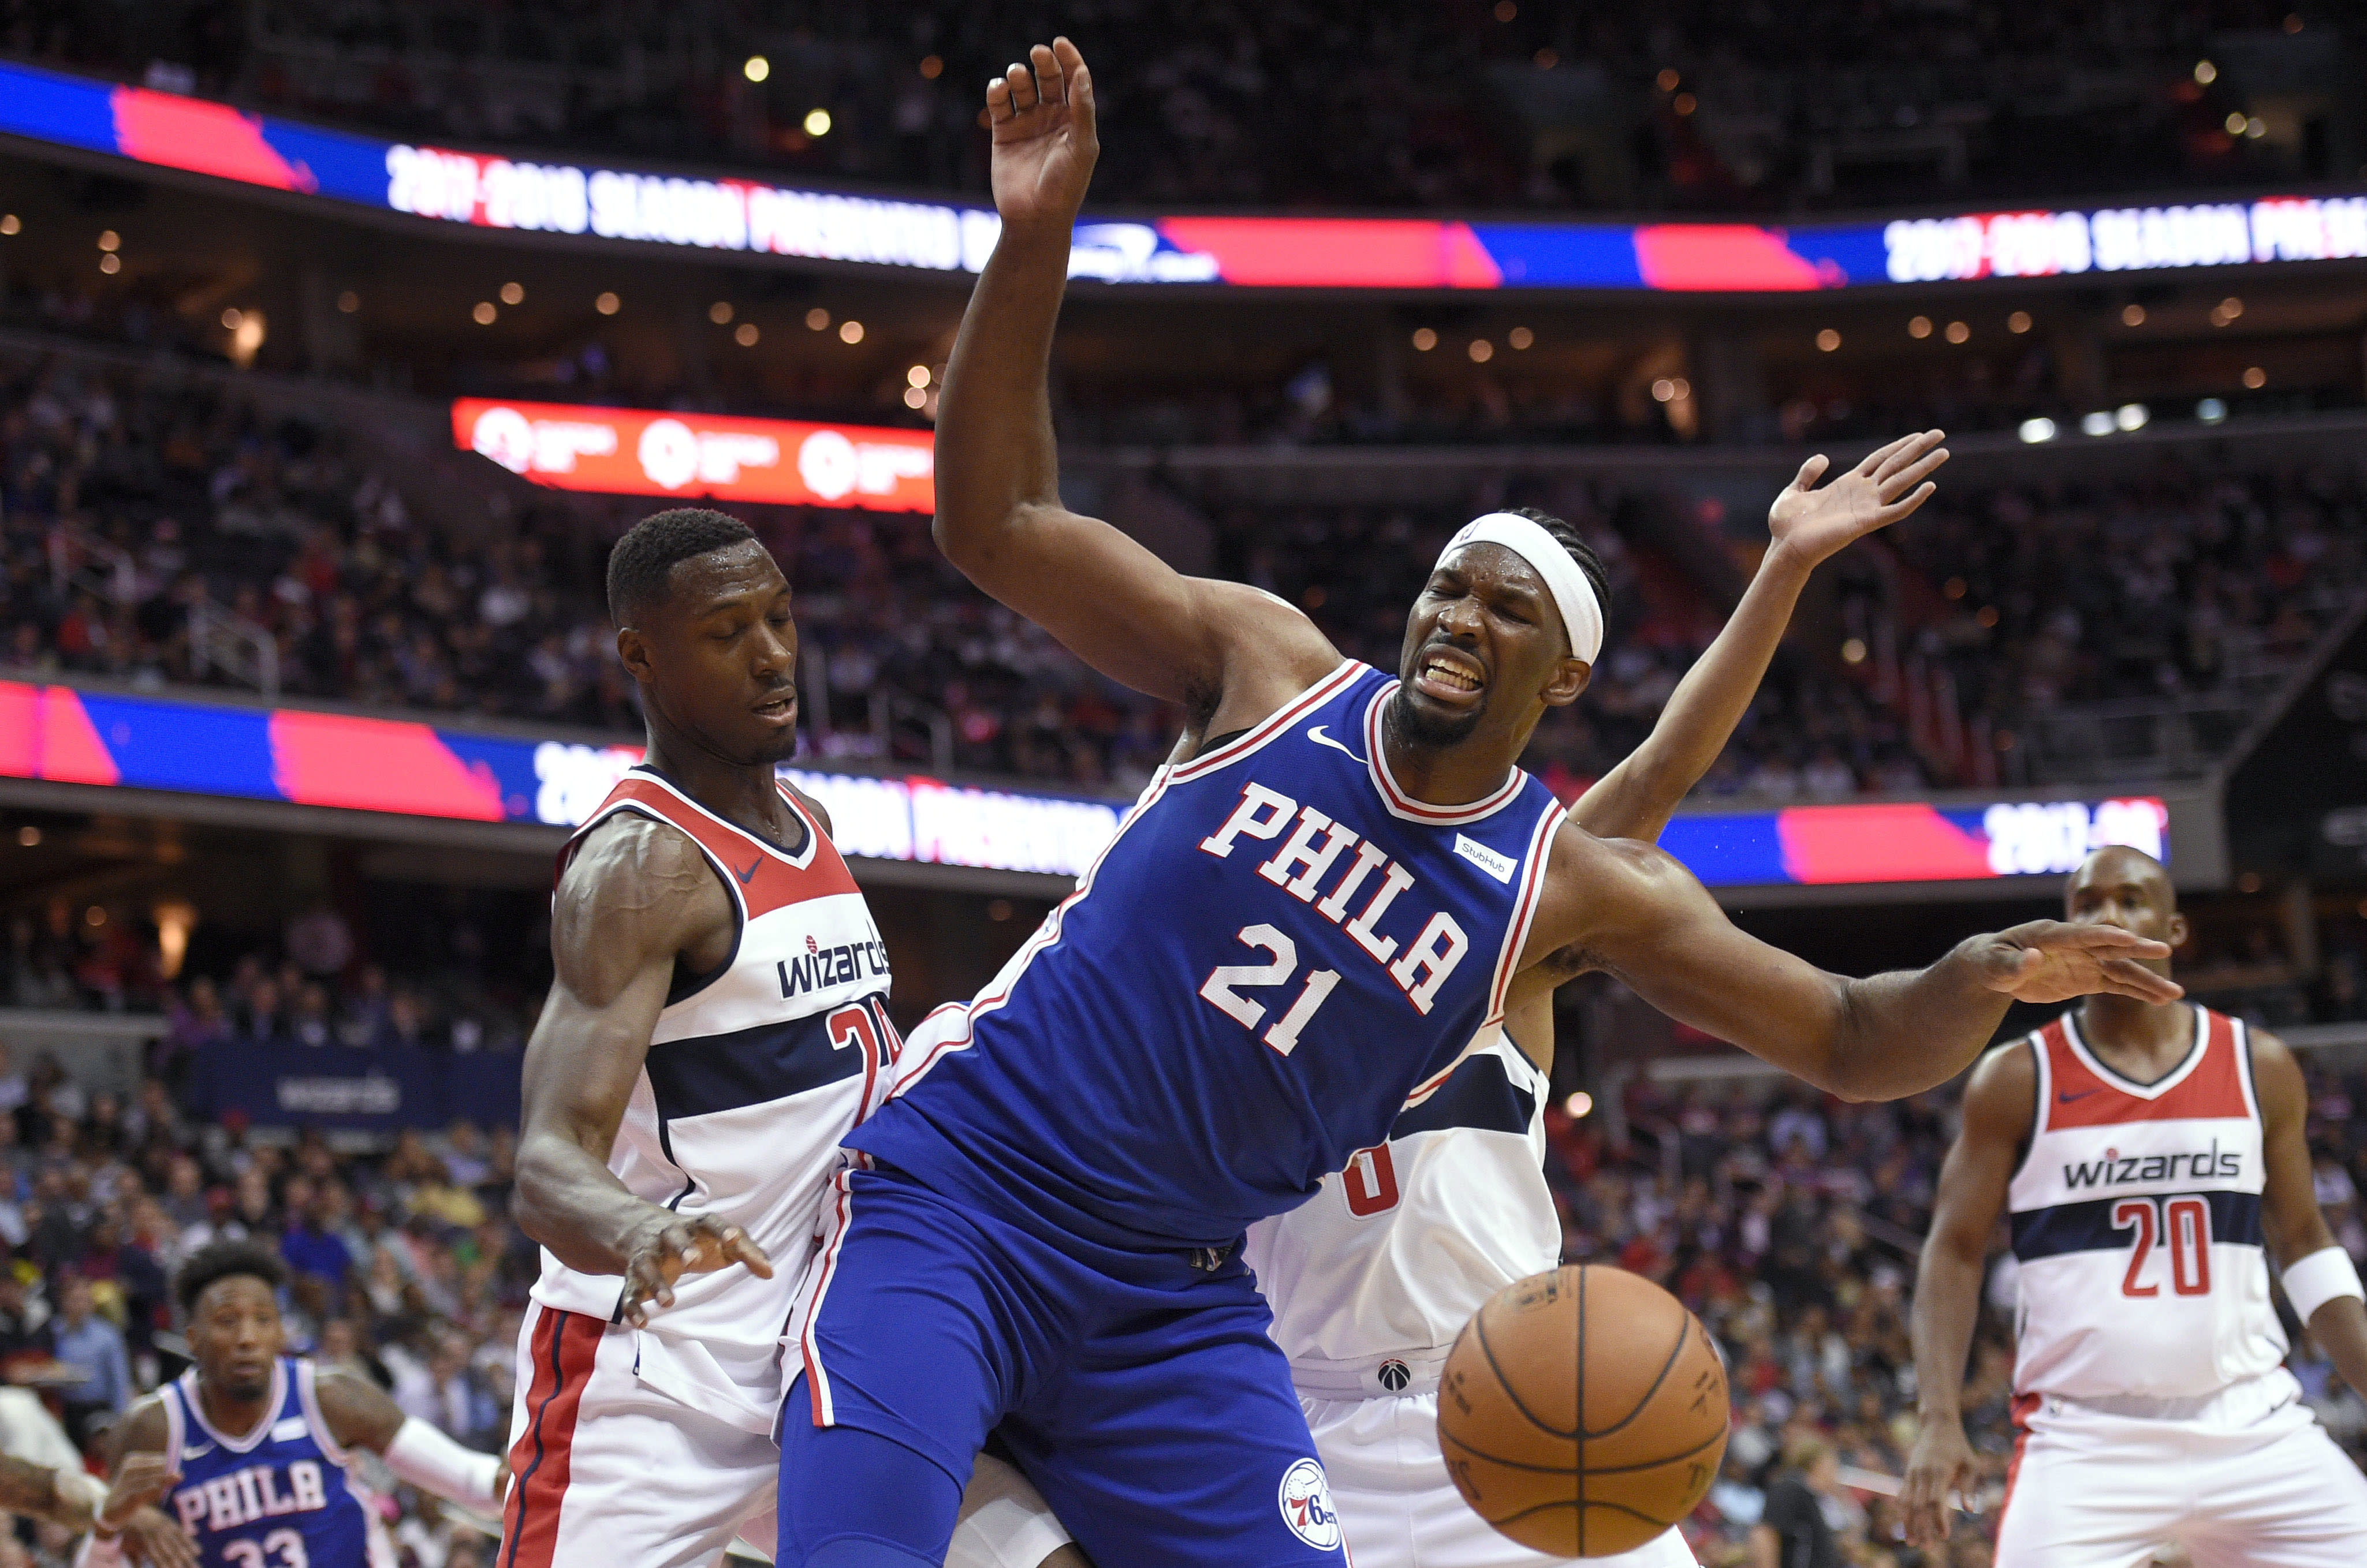 Fans shower 76ers with 'Trust the Process' chants in D.C.4099 x 2716